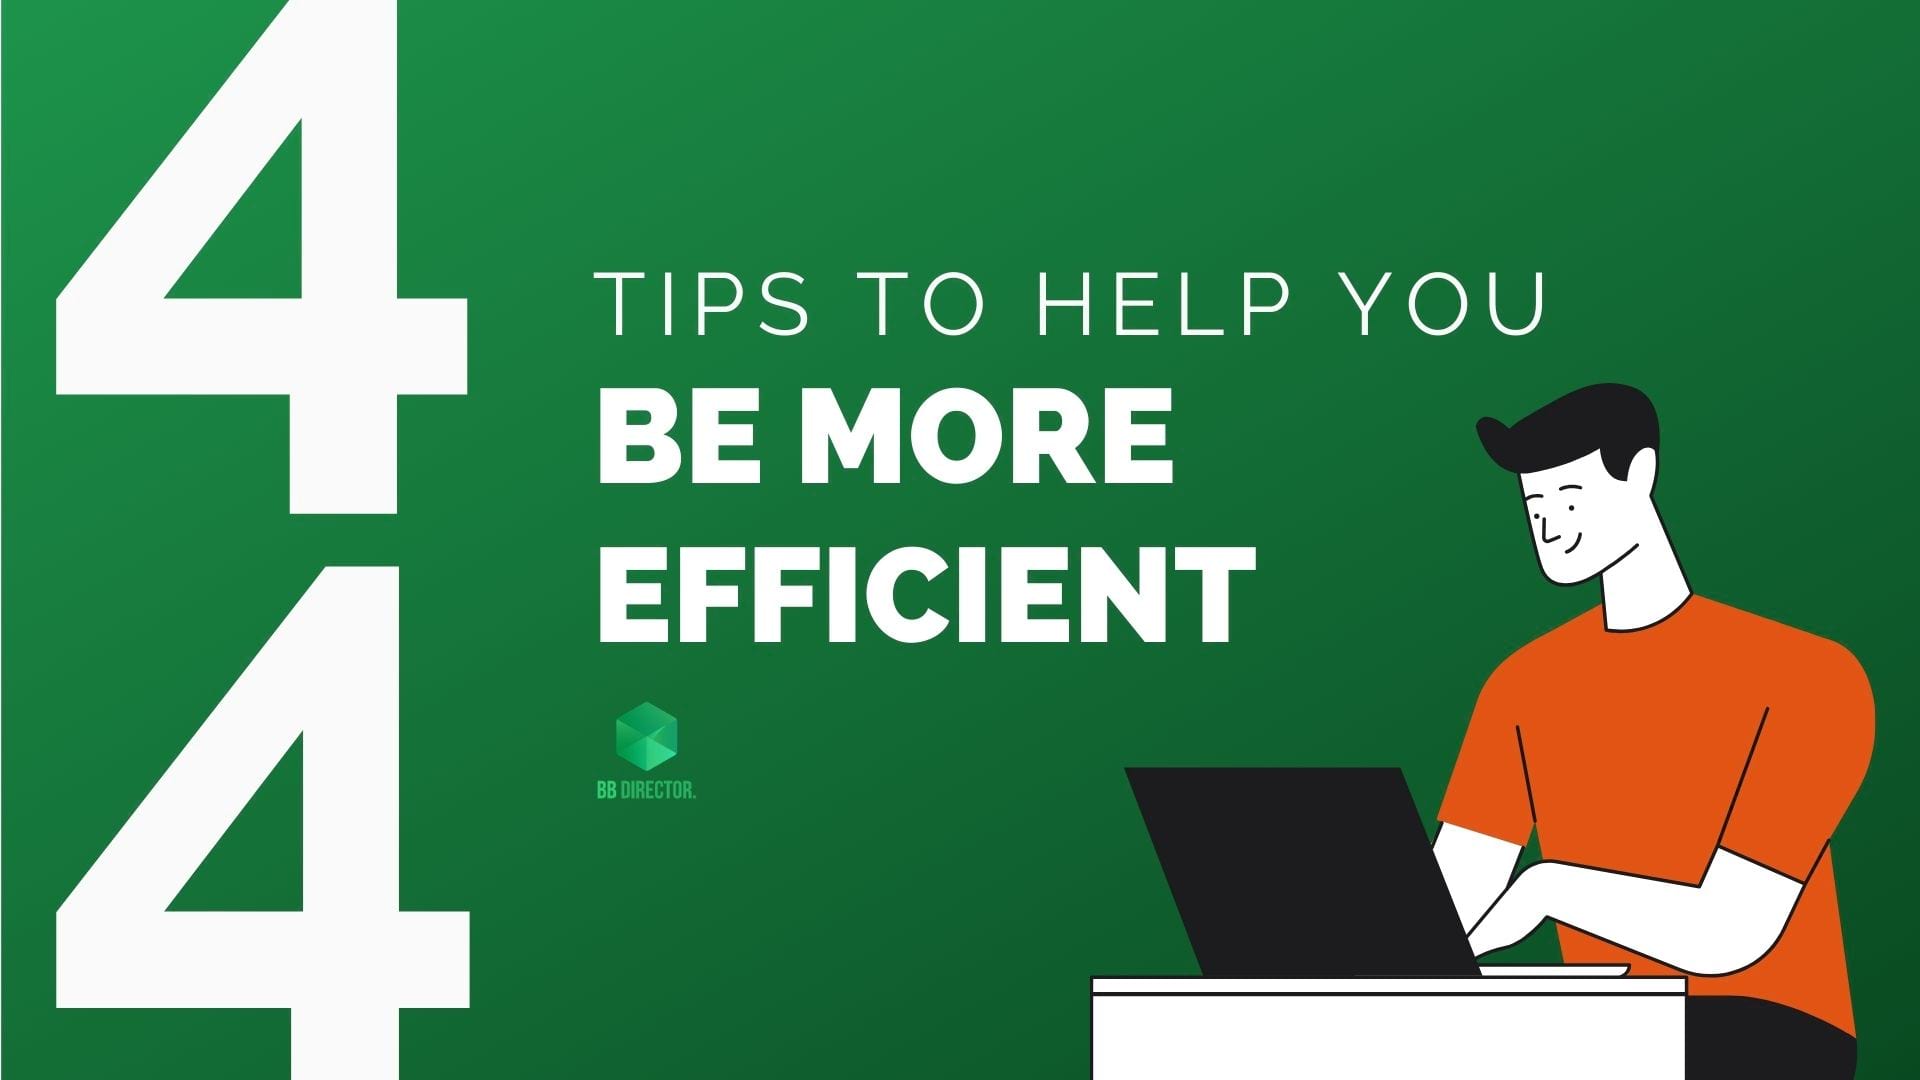 Tips to help you be more efficient